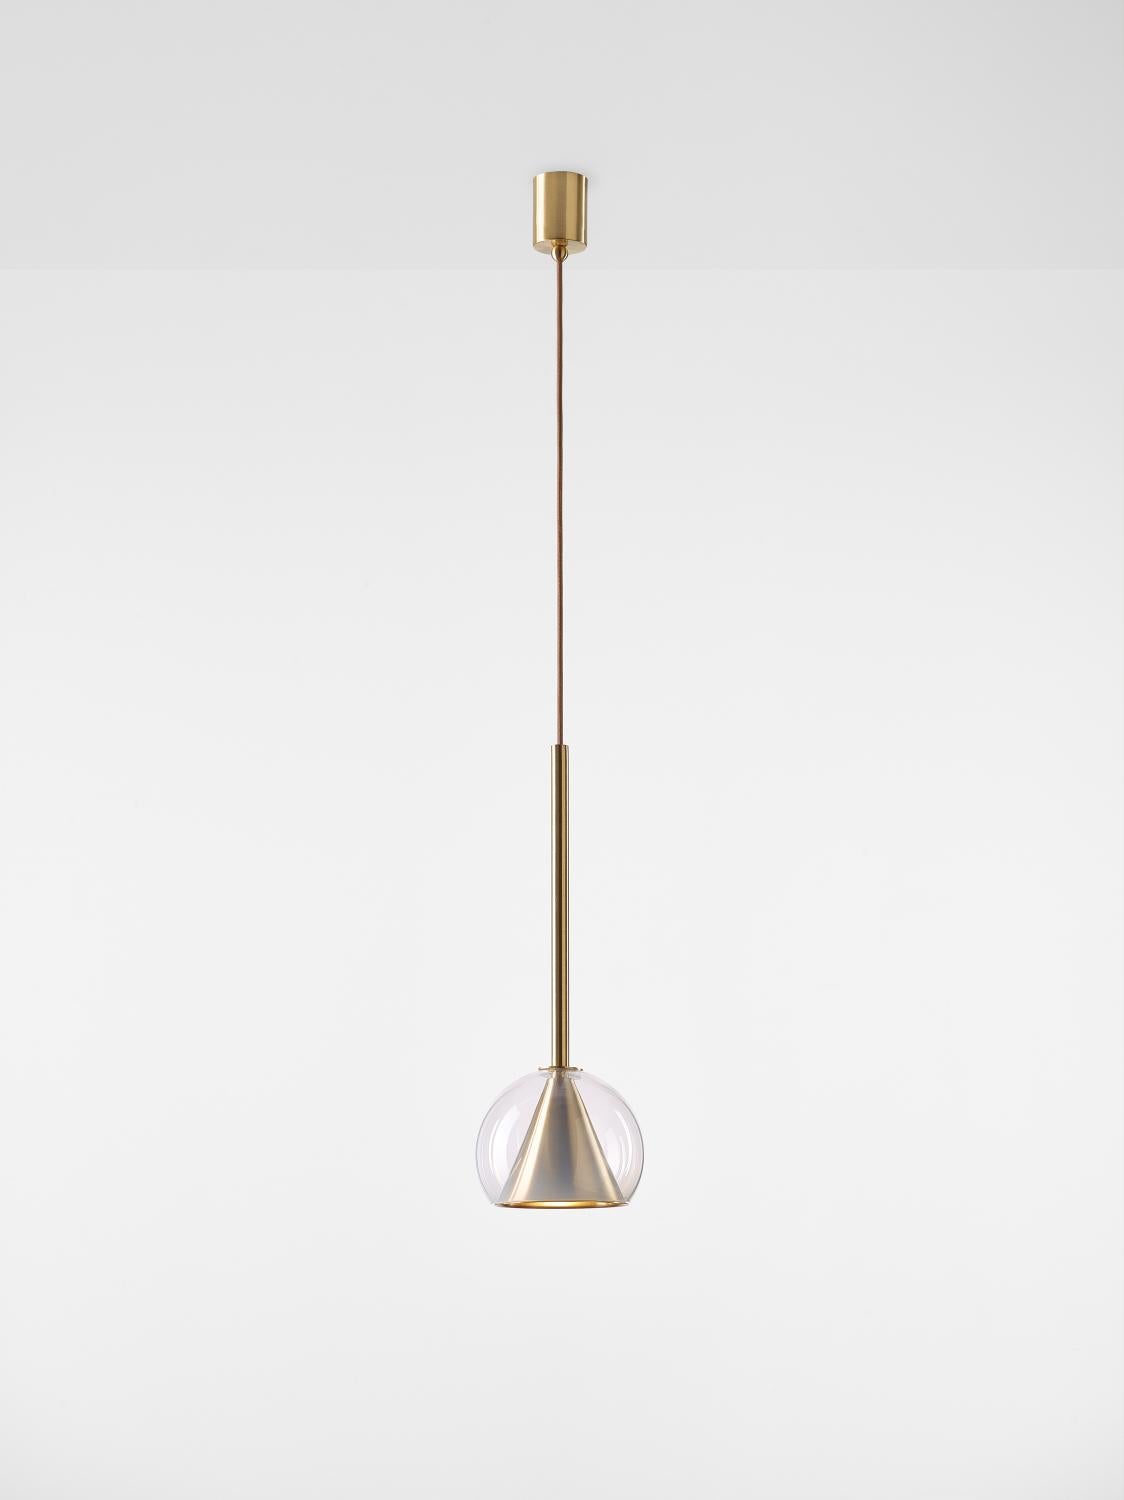 Small alabaster white kono pendant light by Dechem Studio
Dimensions: D 19 x H 52 cm
Materials: brass, glass.
Also available: different finishes and colours available.

This collection of suspended light fixtures combines the elementary